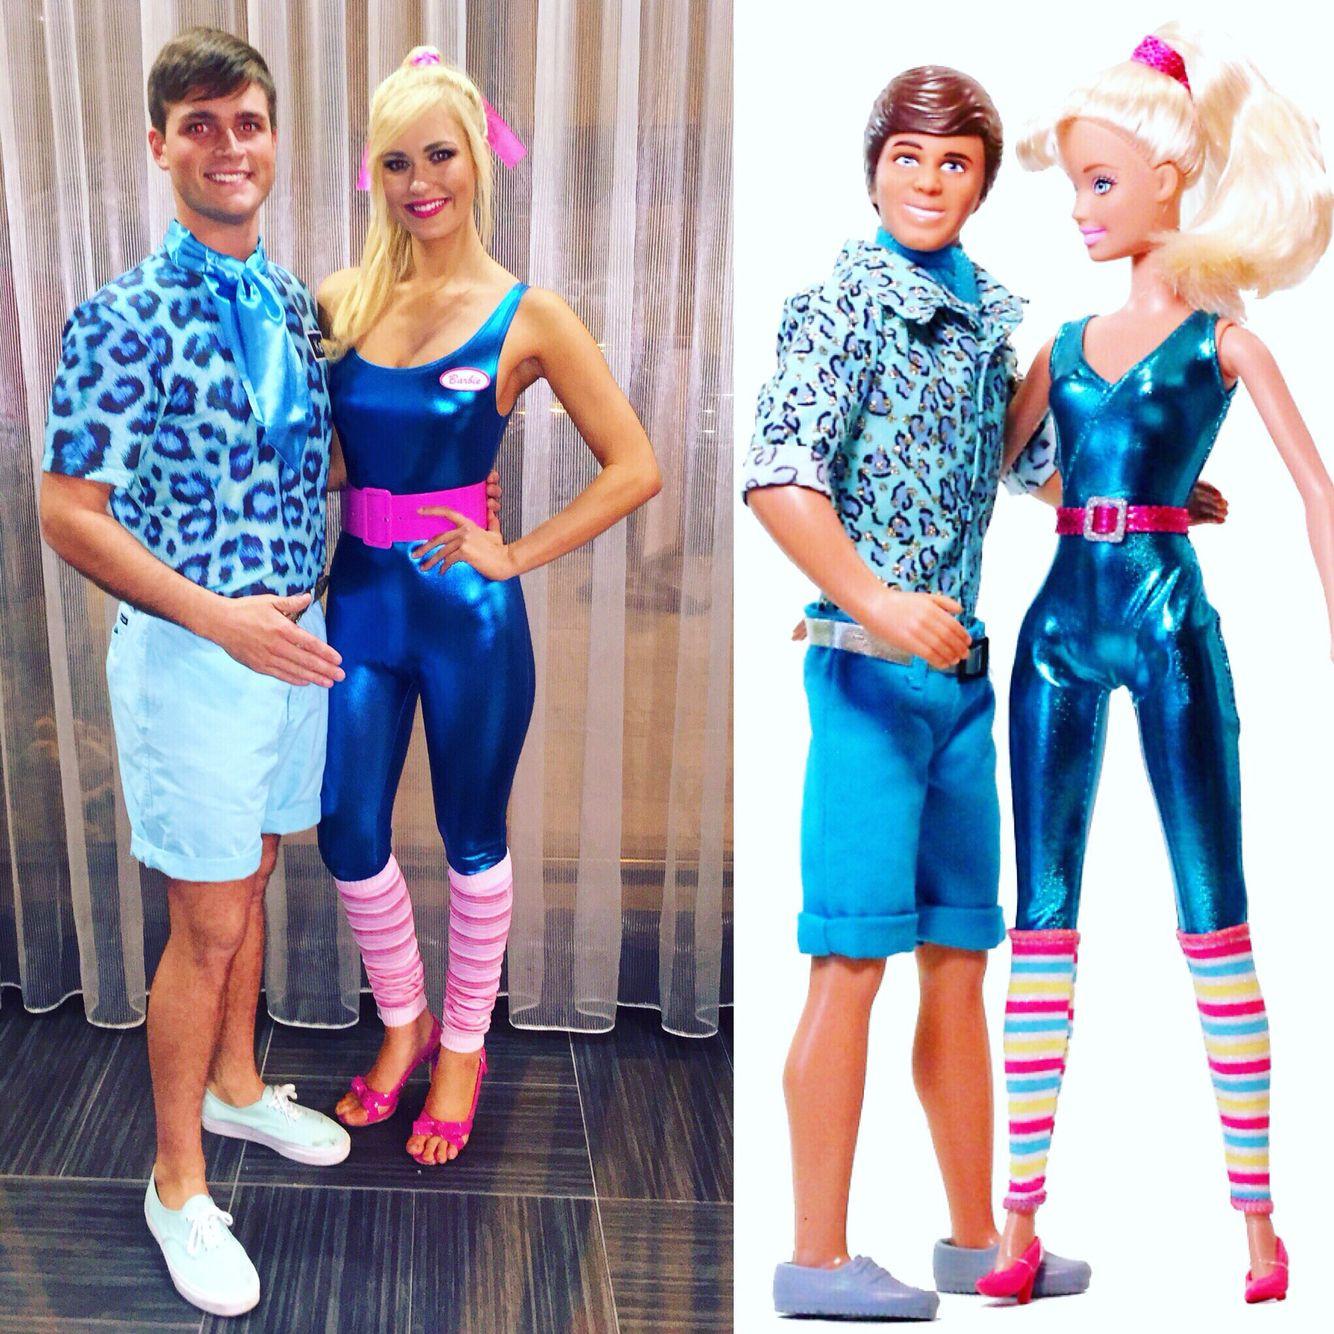 DIY Barbie Costumes For Adults
 Barbie and Ken Toy Story 3 Halloween Costume